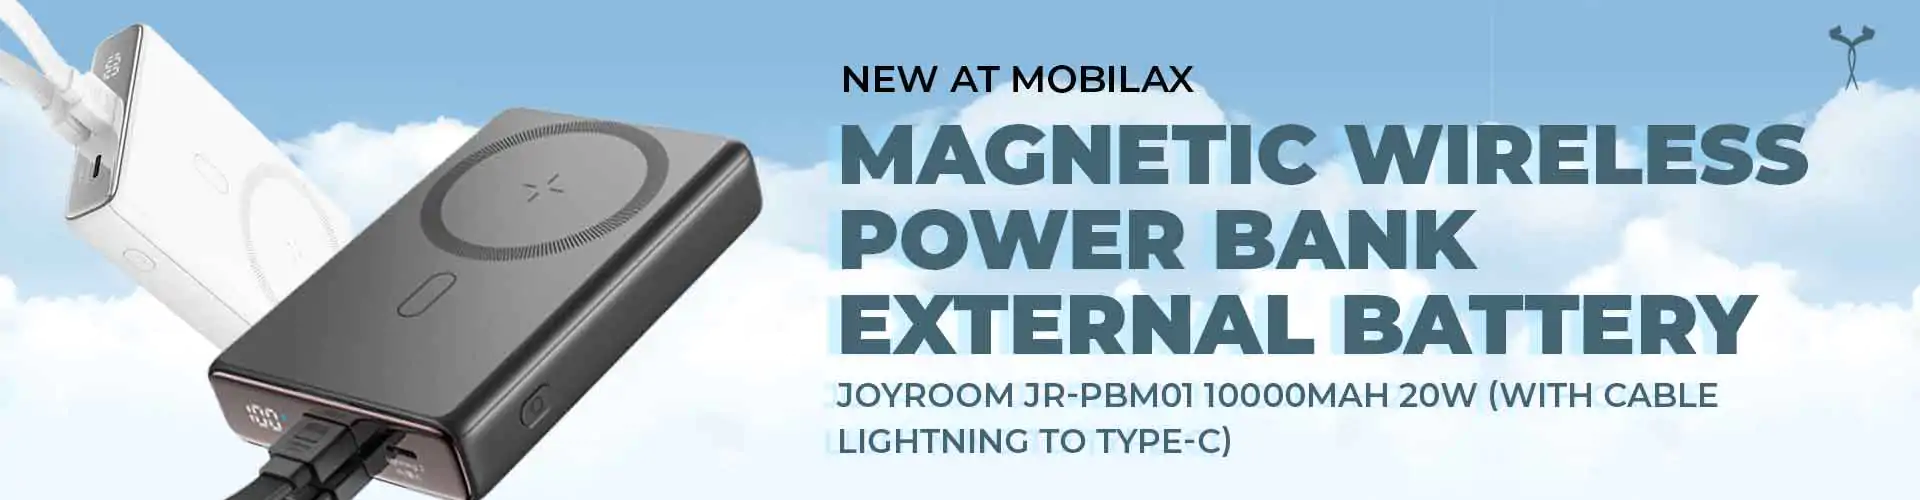 Magnetic Wireless Power Bank External Battery JOYROOM JR-PBM01 10000mAh 20W (with Cable Lightning to Type-C)